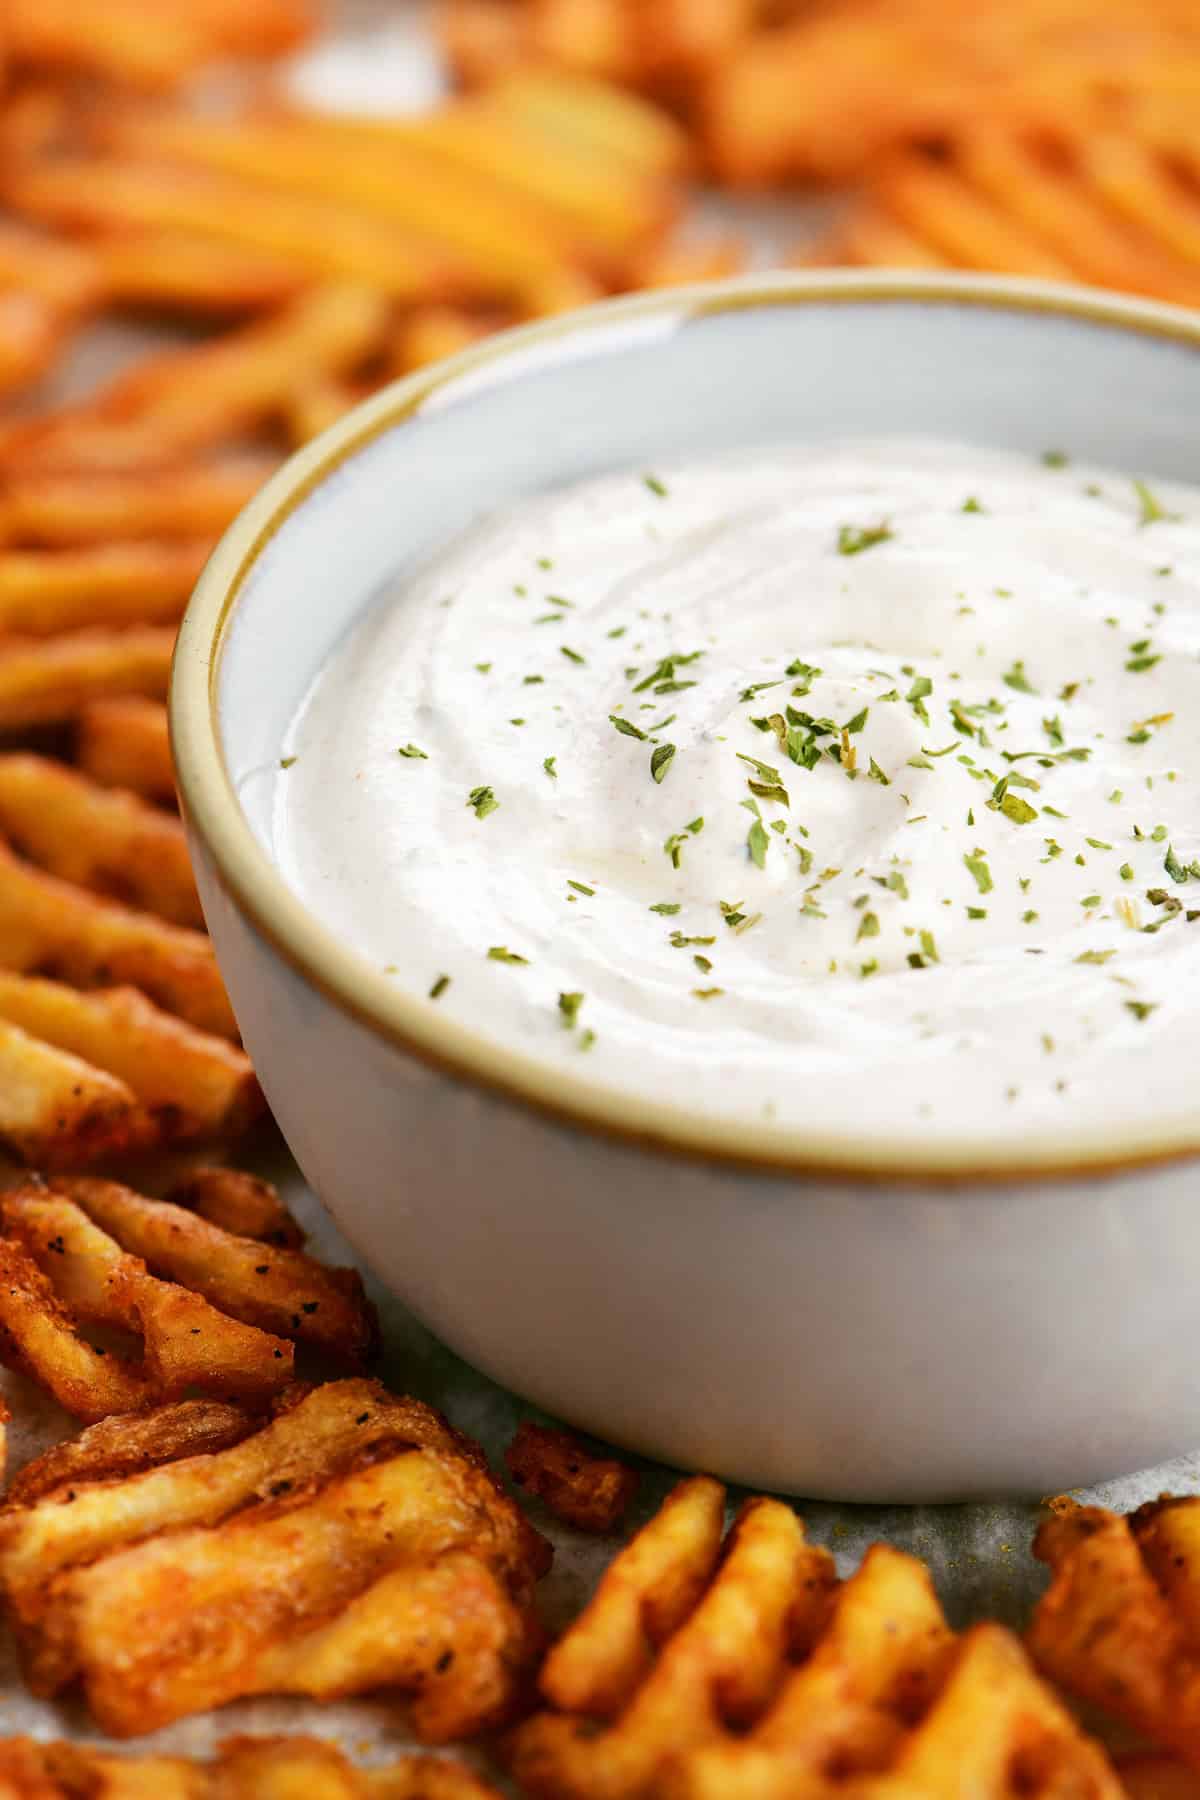 Seasoned sour cream in a gray bowl surrounded by waffle fries.